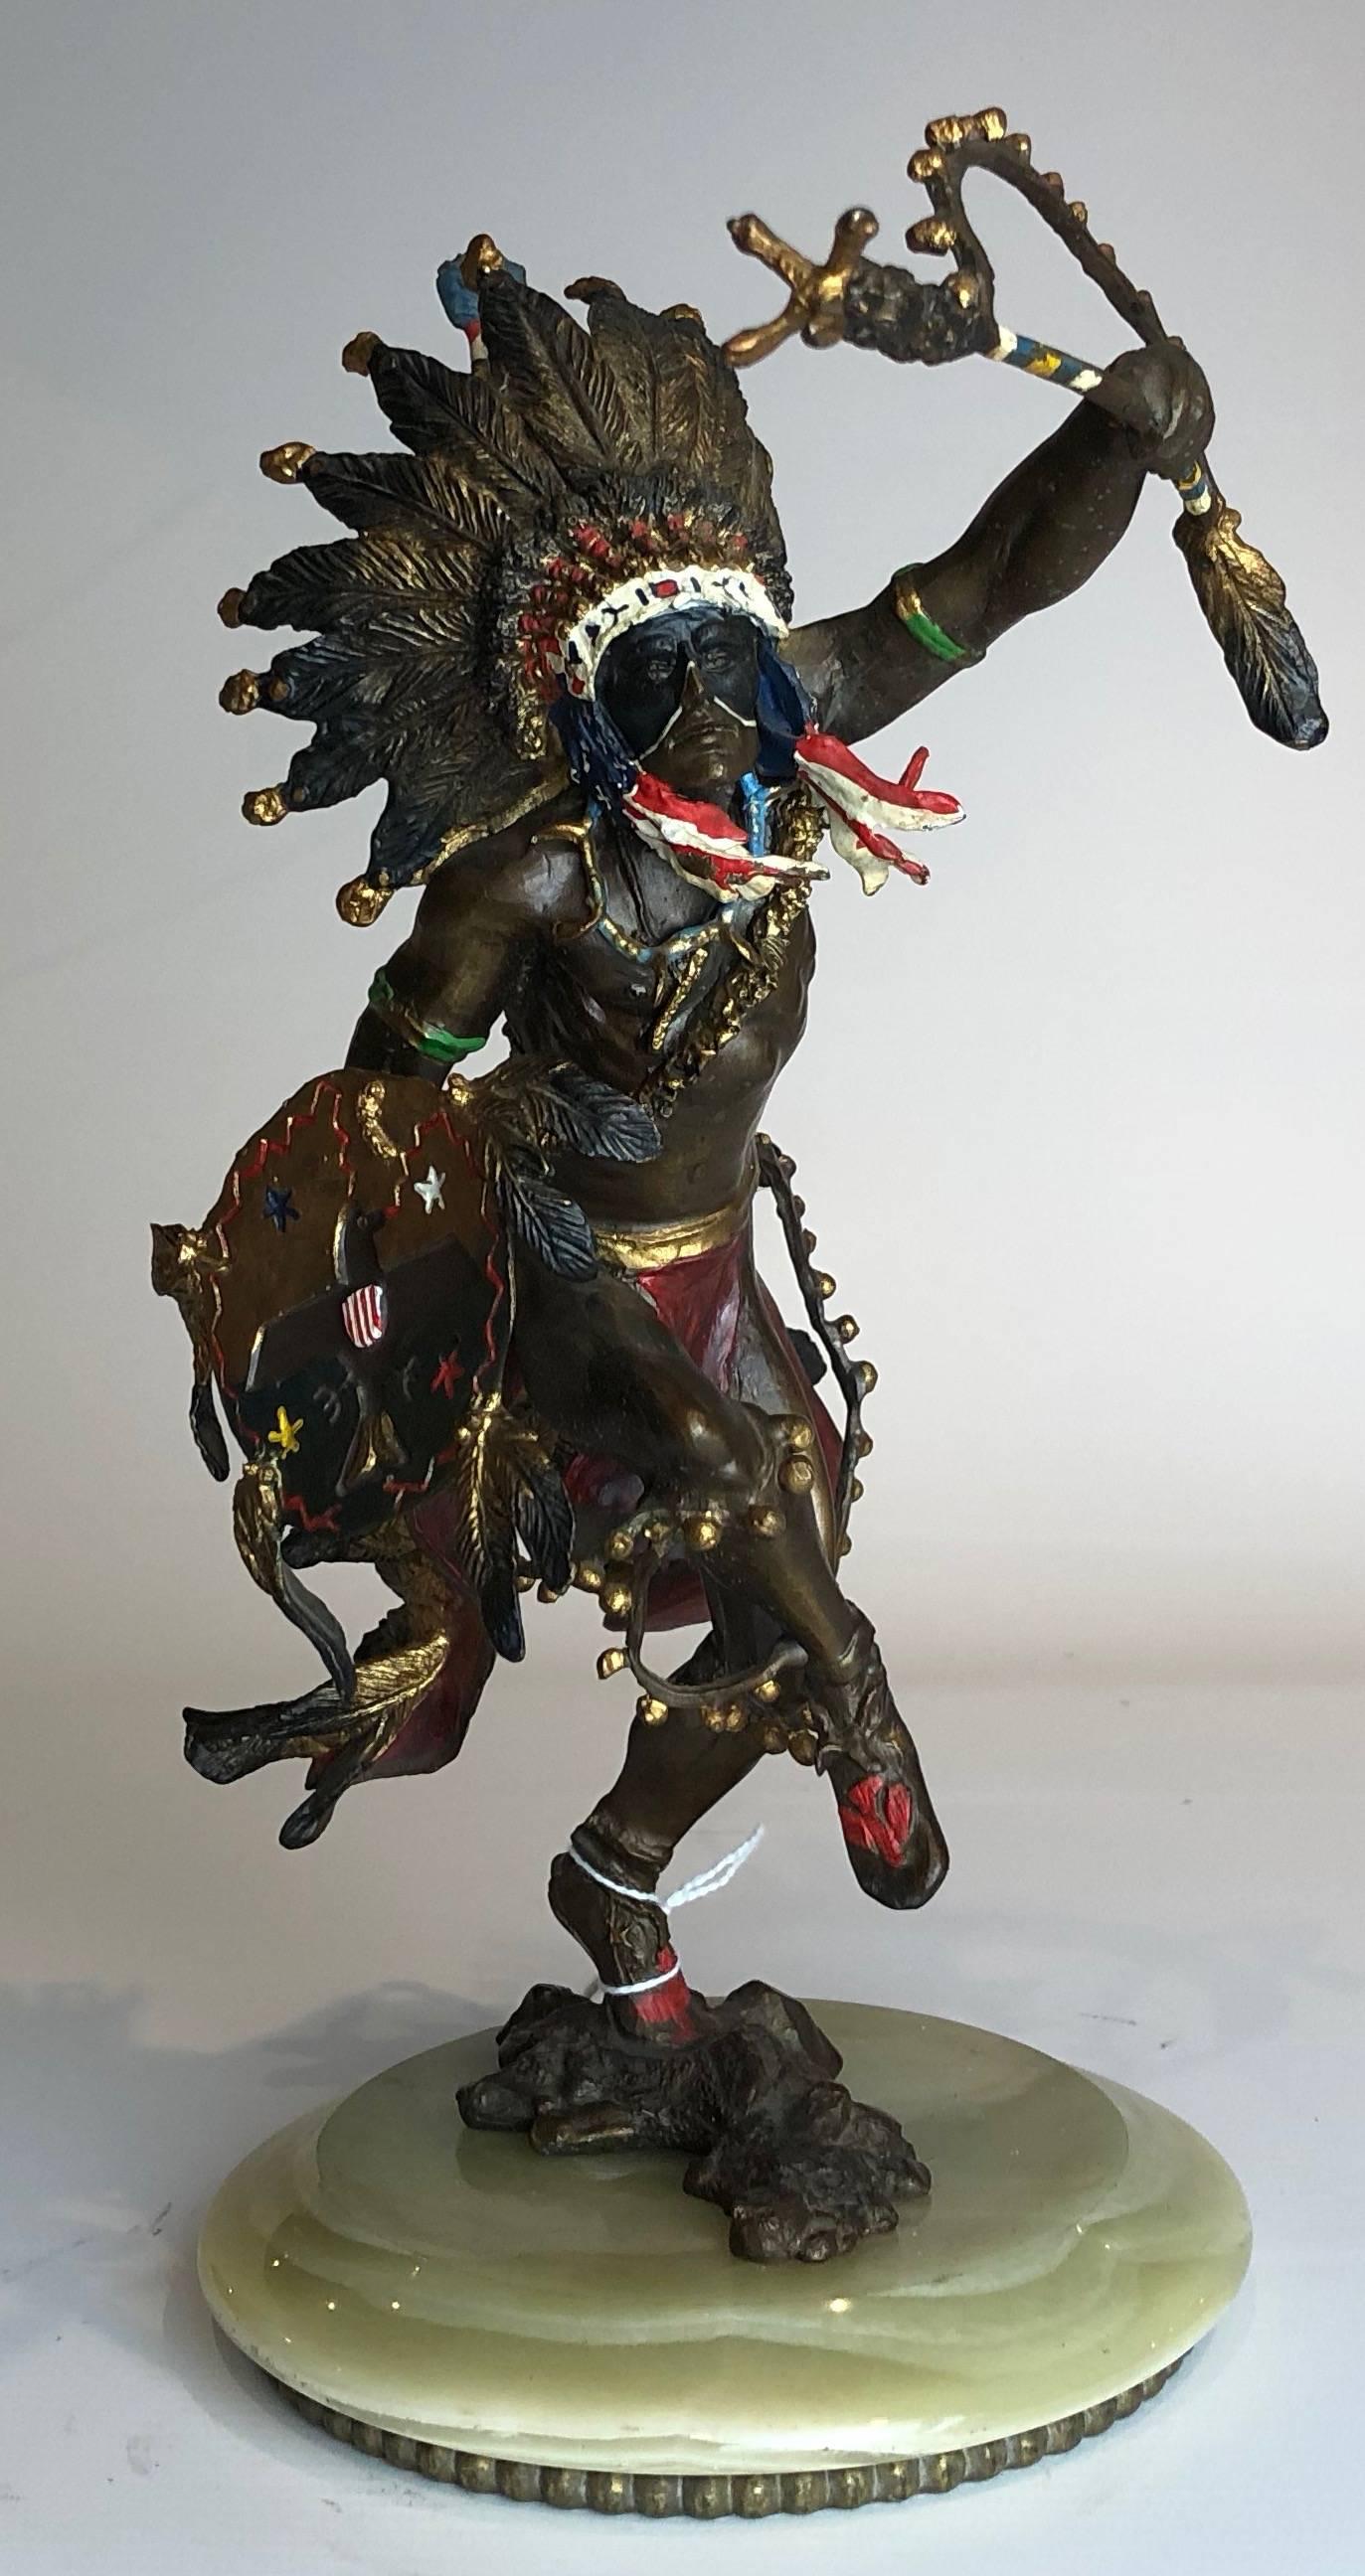 An excellent example of an early 20th century Austrian polychromed and patinated bronze sculpture depicting a Native American Indian running into battle

Standing 11